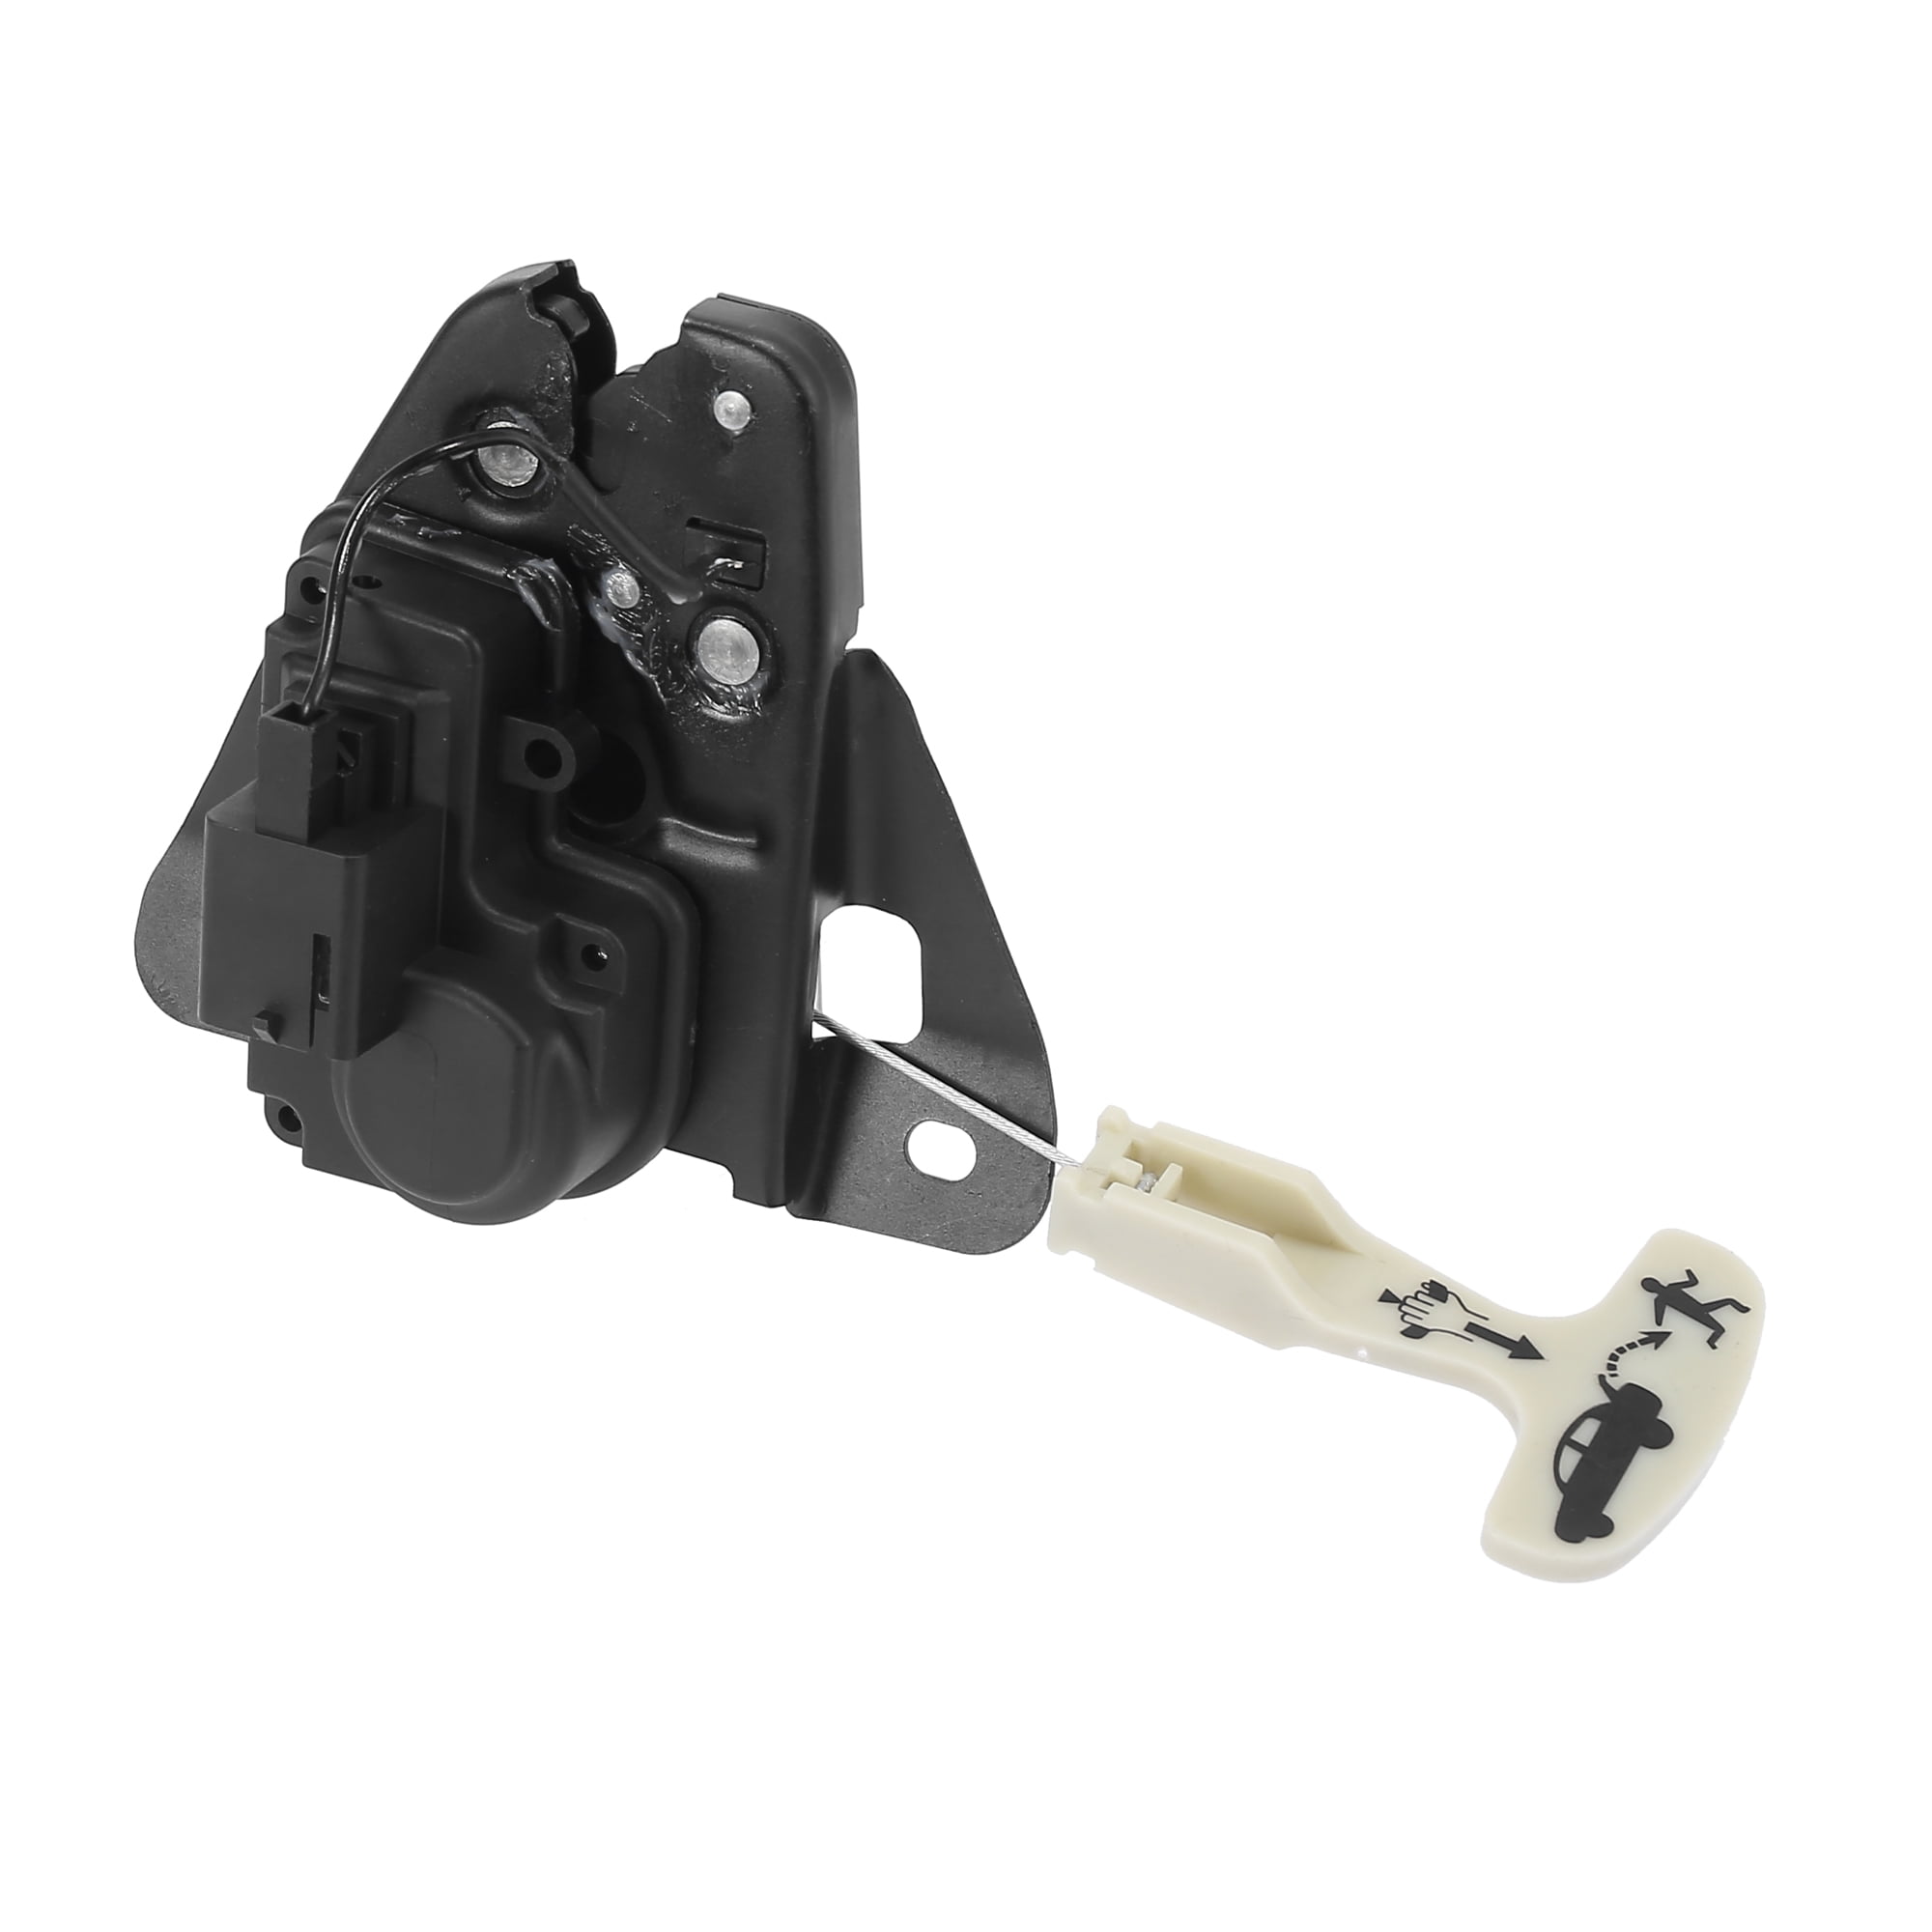 5056244AB 5056244AC Trunk Lock Actuator/Tailgate Lock Latch Fits for CHRYSLER DODGE Selected Models Replaces 5056244AA 72050 931-714